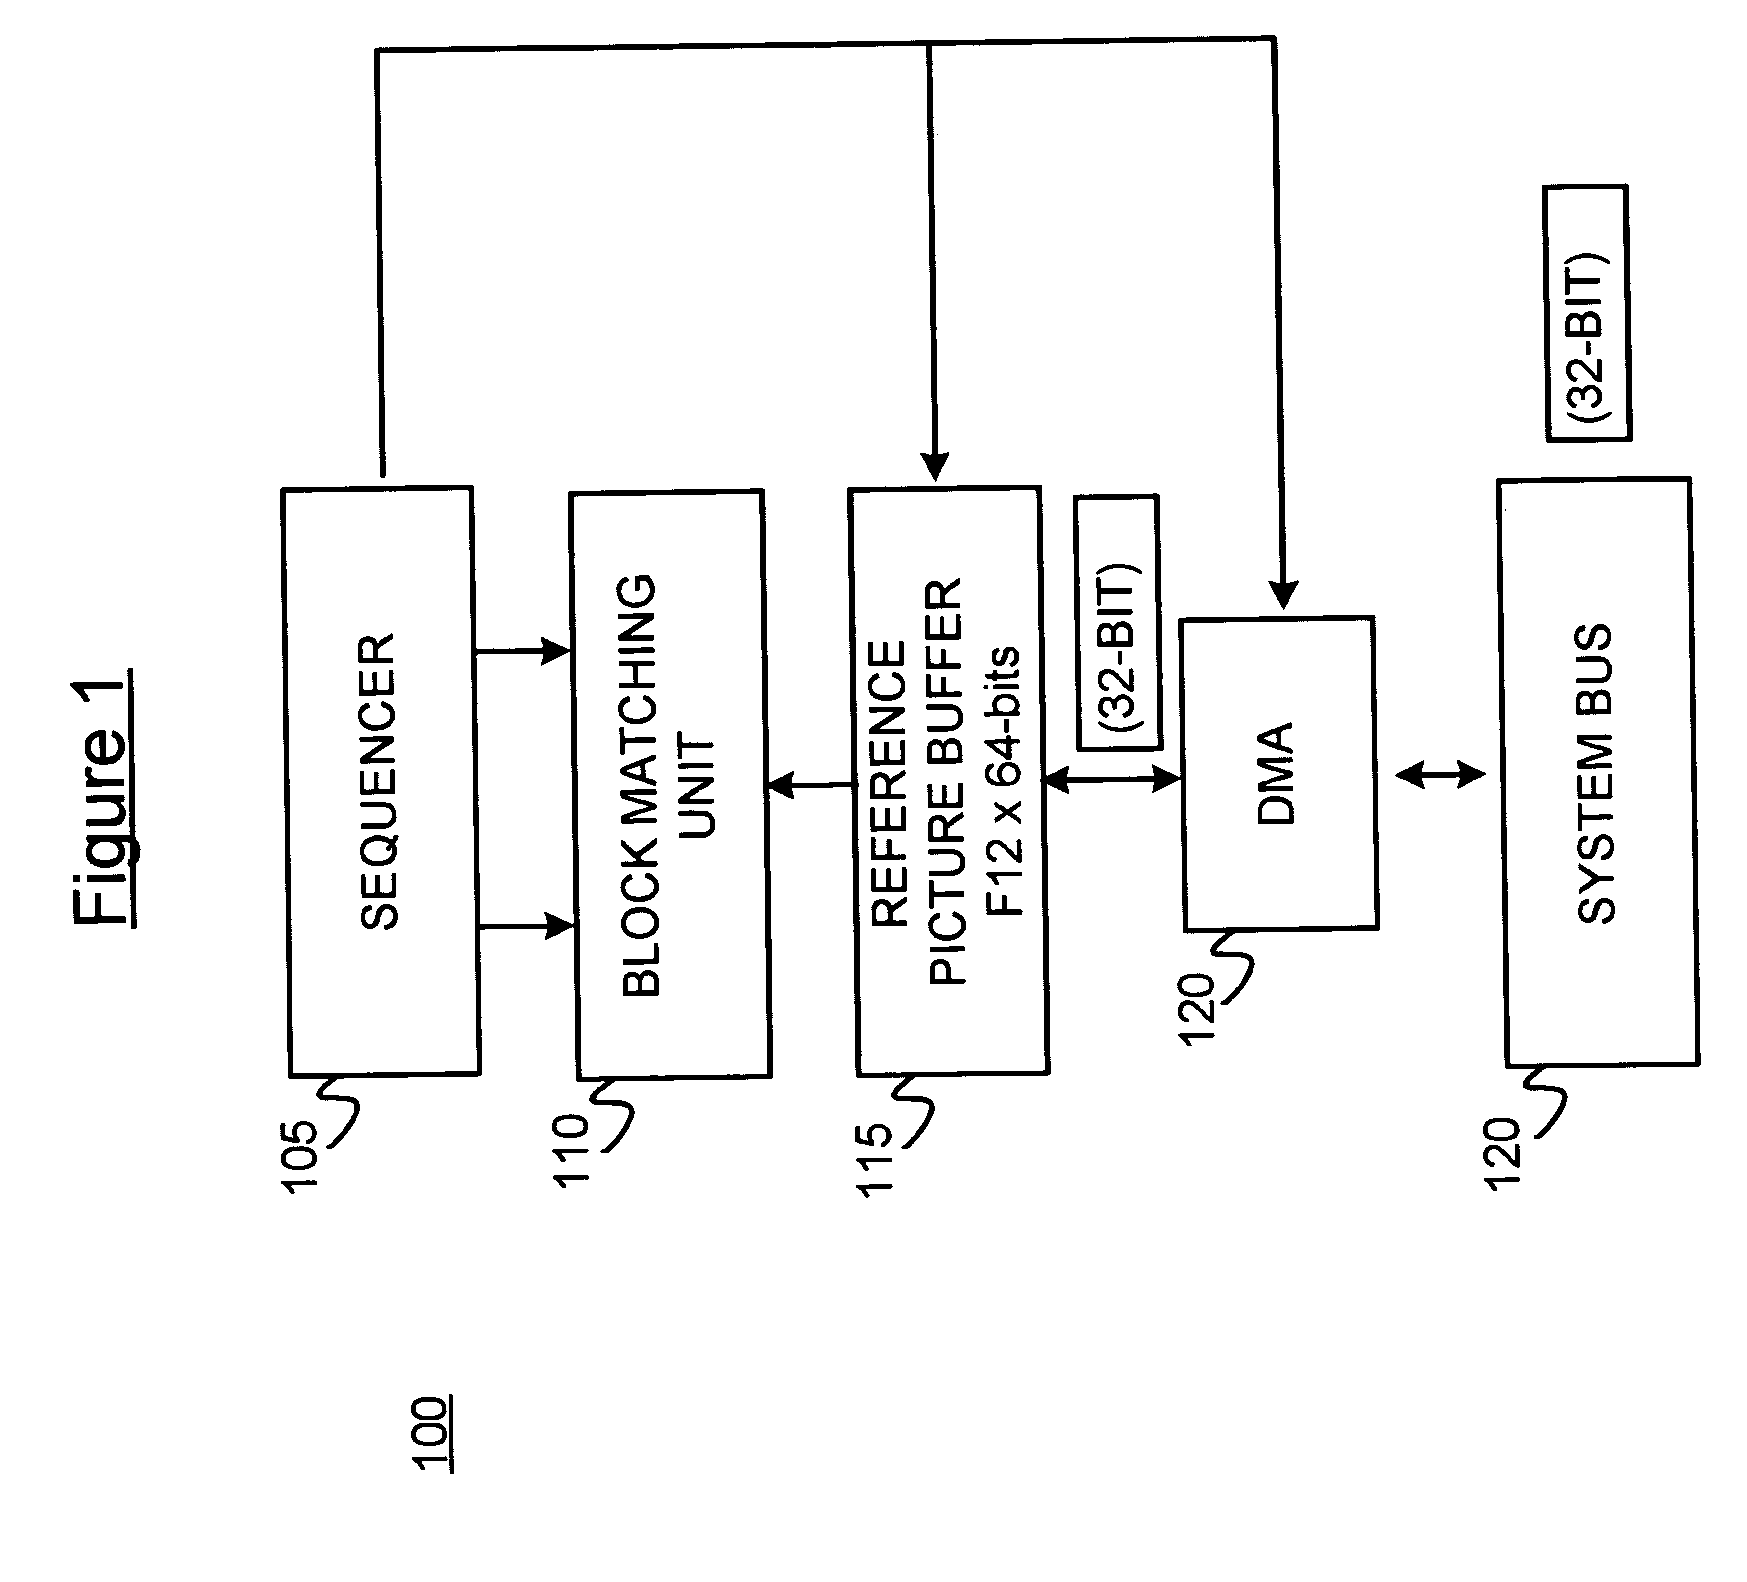 Systolic-array based systems and methods for performing block matching in motion compensation